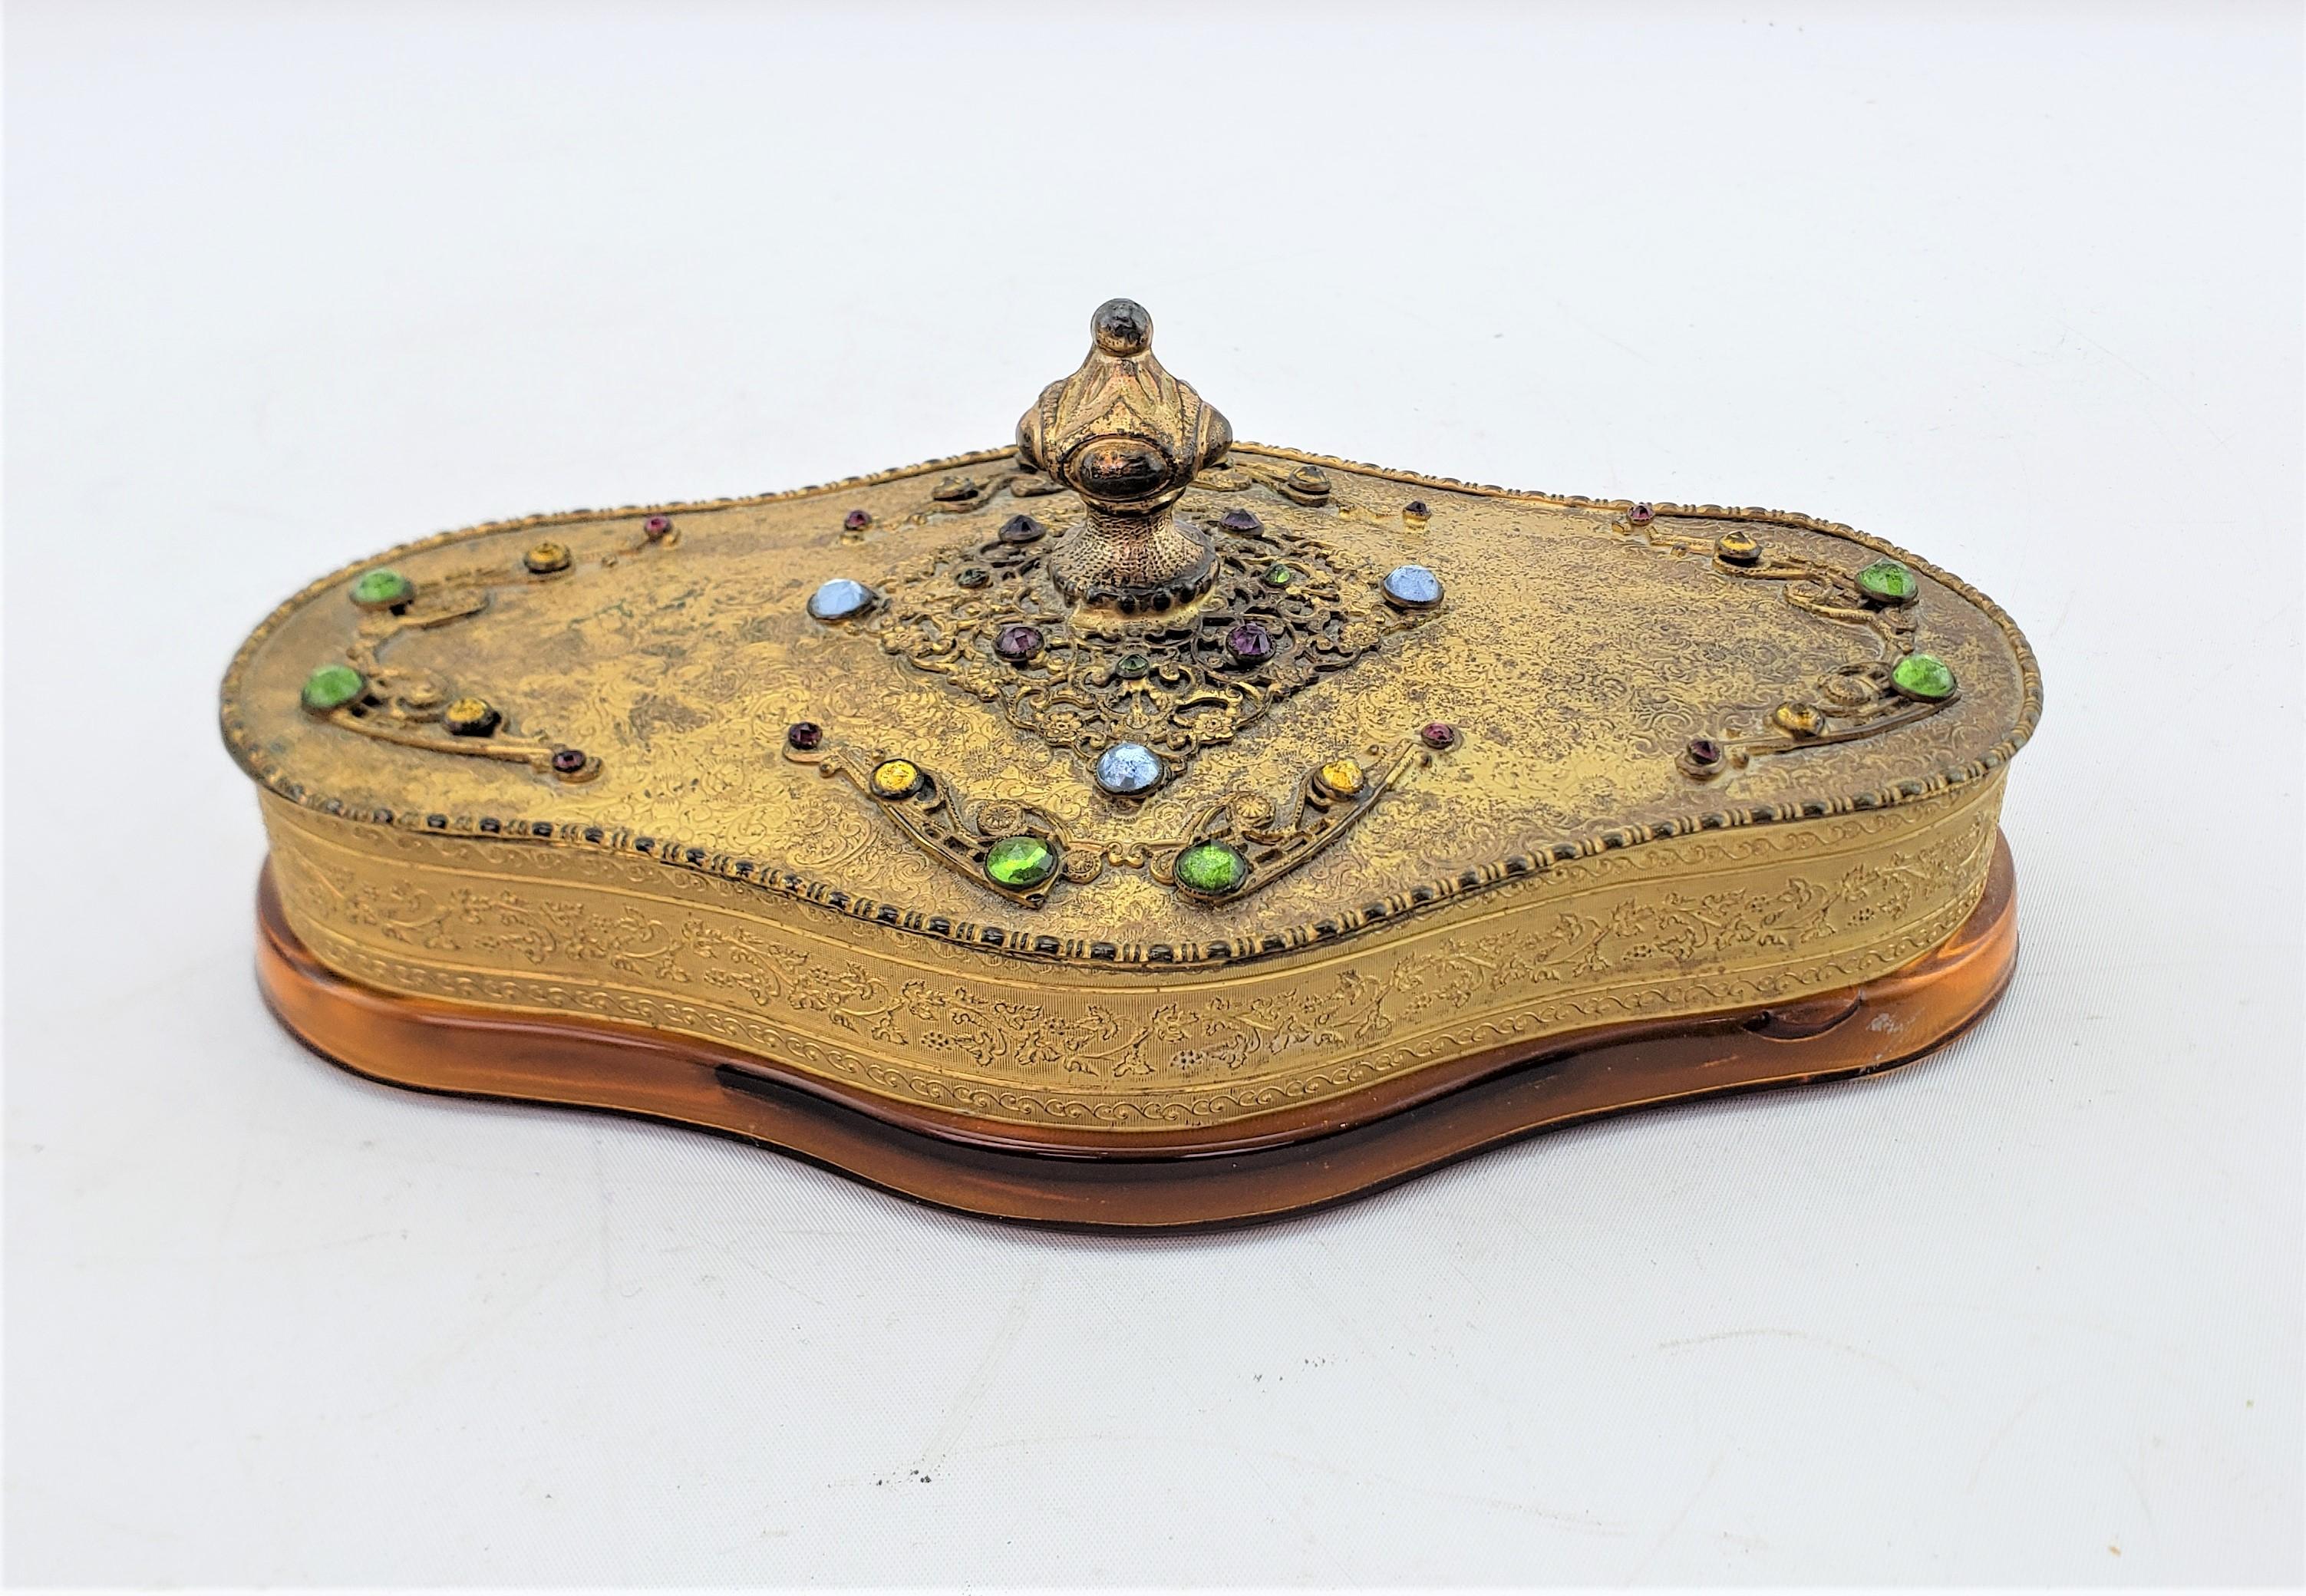 This antique decorative box was made by the Apollo Manufacturing Company of the United States in approximately 1920 in an Anglo-Indian style. The top of the box is composed of spelter with a gilt finish and inset colored glass cabachons. The bottom